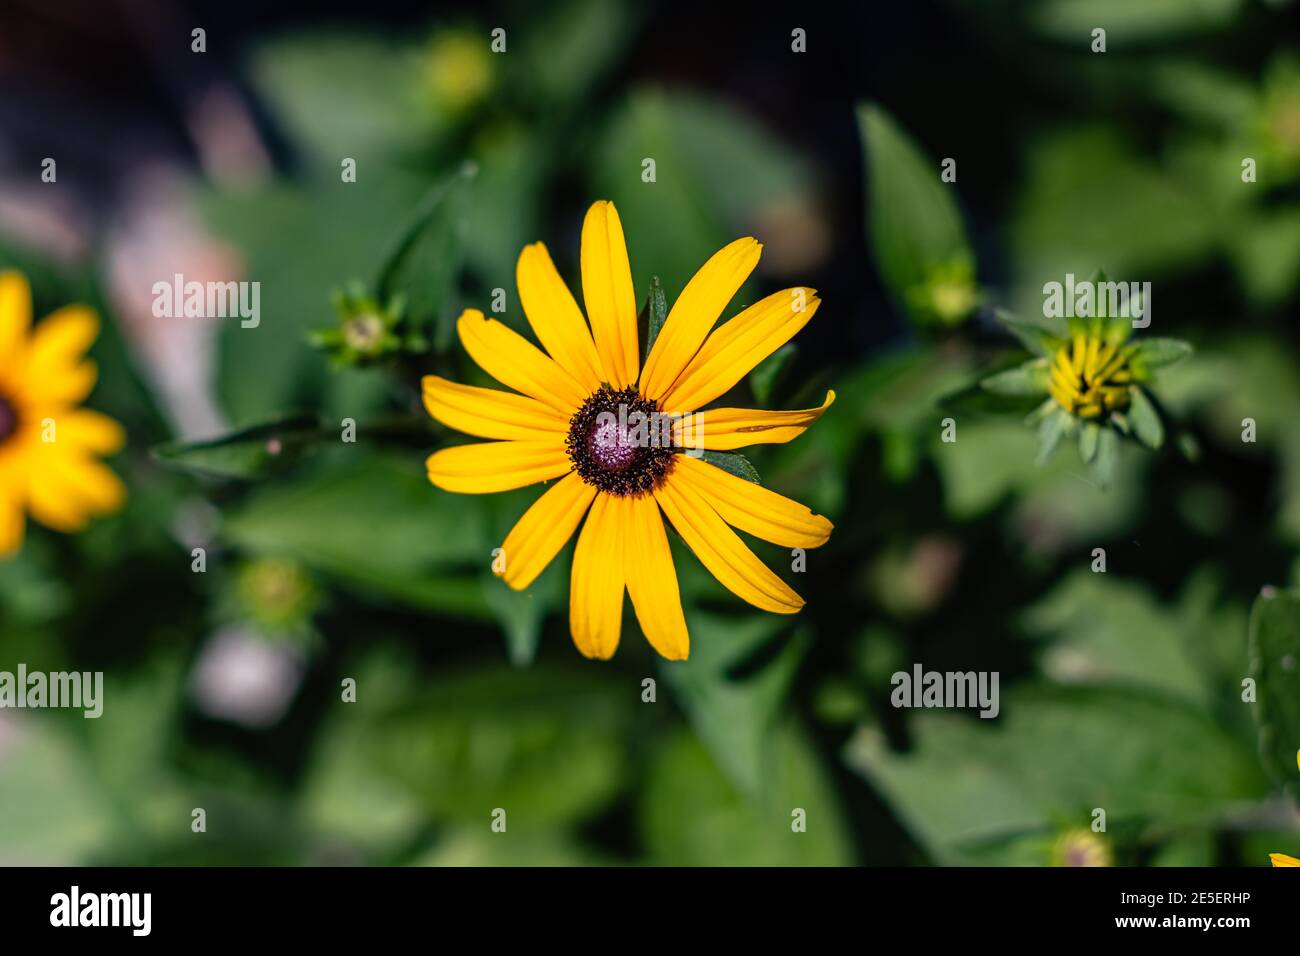 Yellow flower with a dark center glowing under the sun Stock Photo